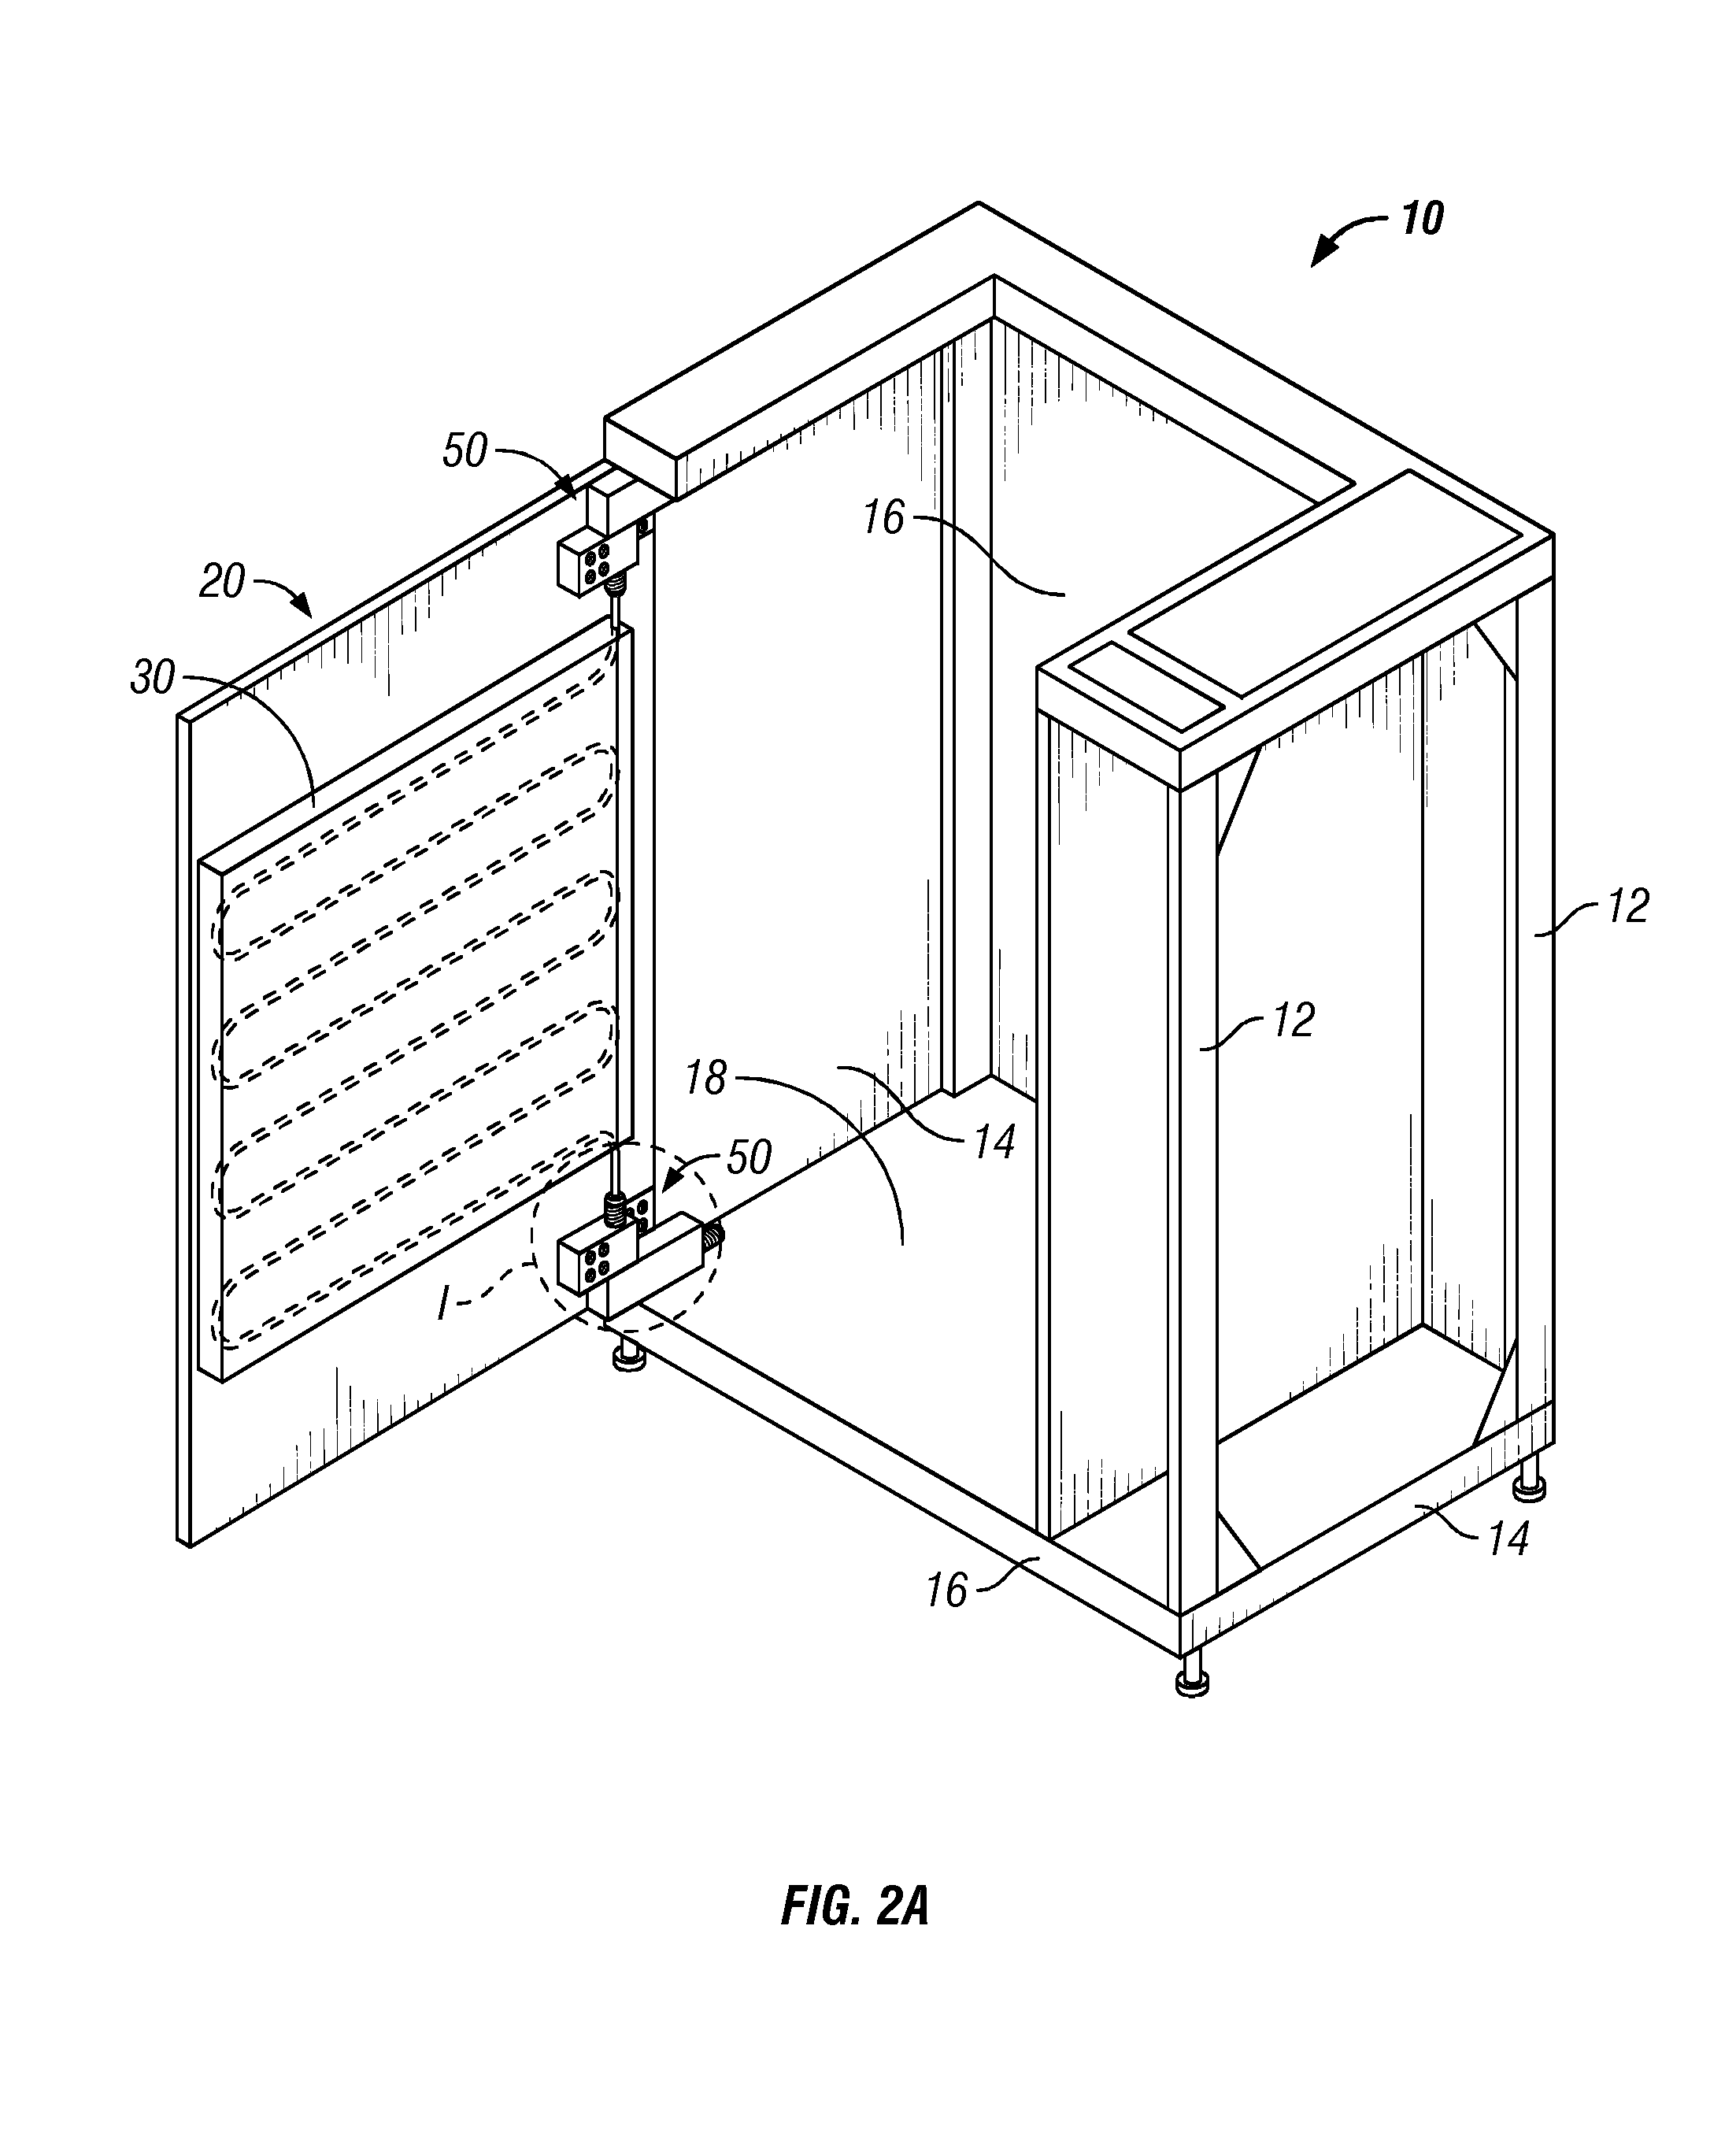 Integral Swivel Hydraulic Connectors, Door Hinges, and Methods and Systems for Their Use